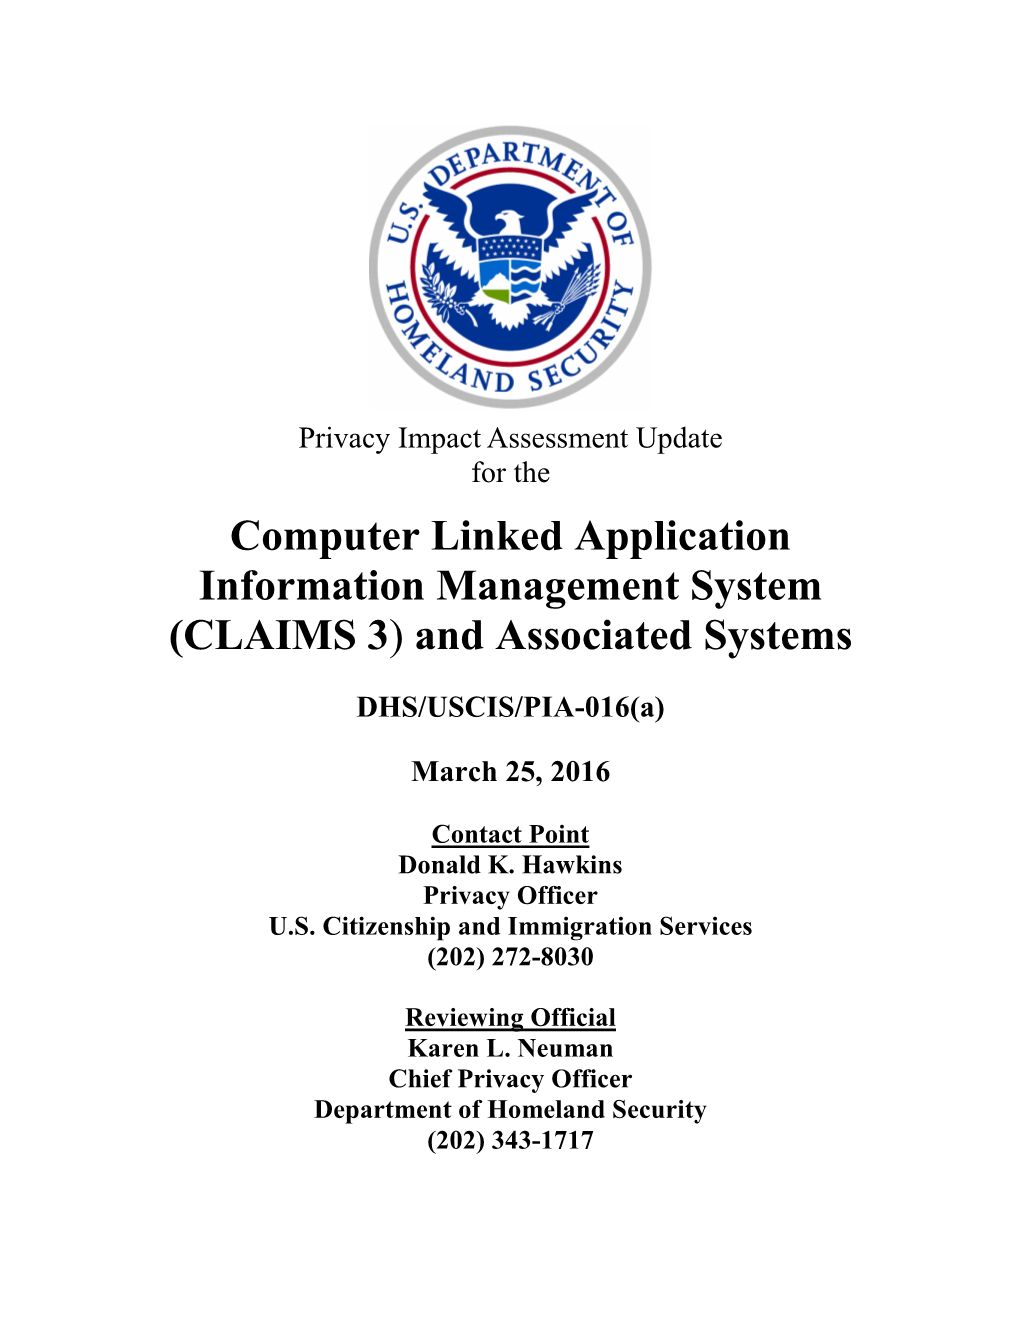 (CLAIMS 3) and Associated Systems